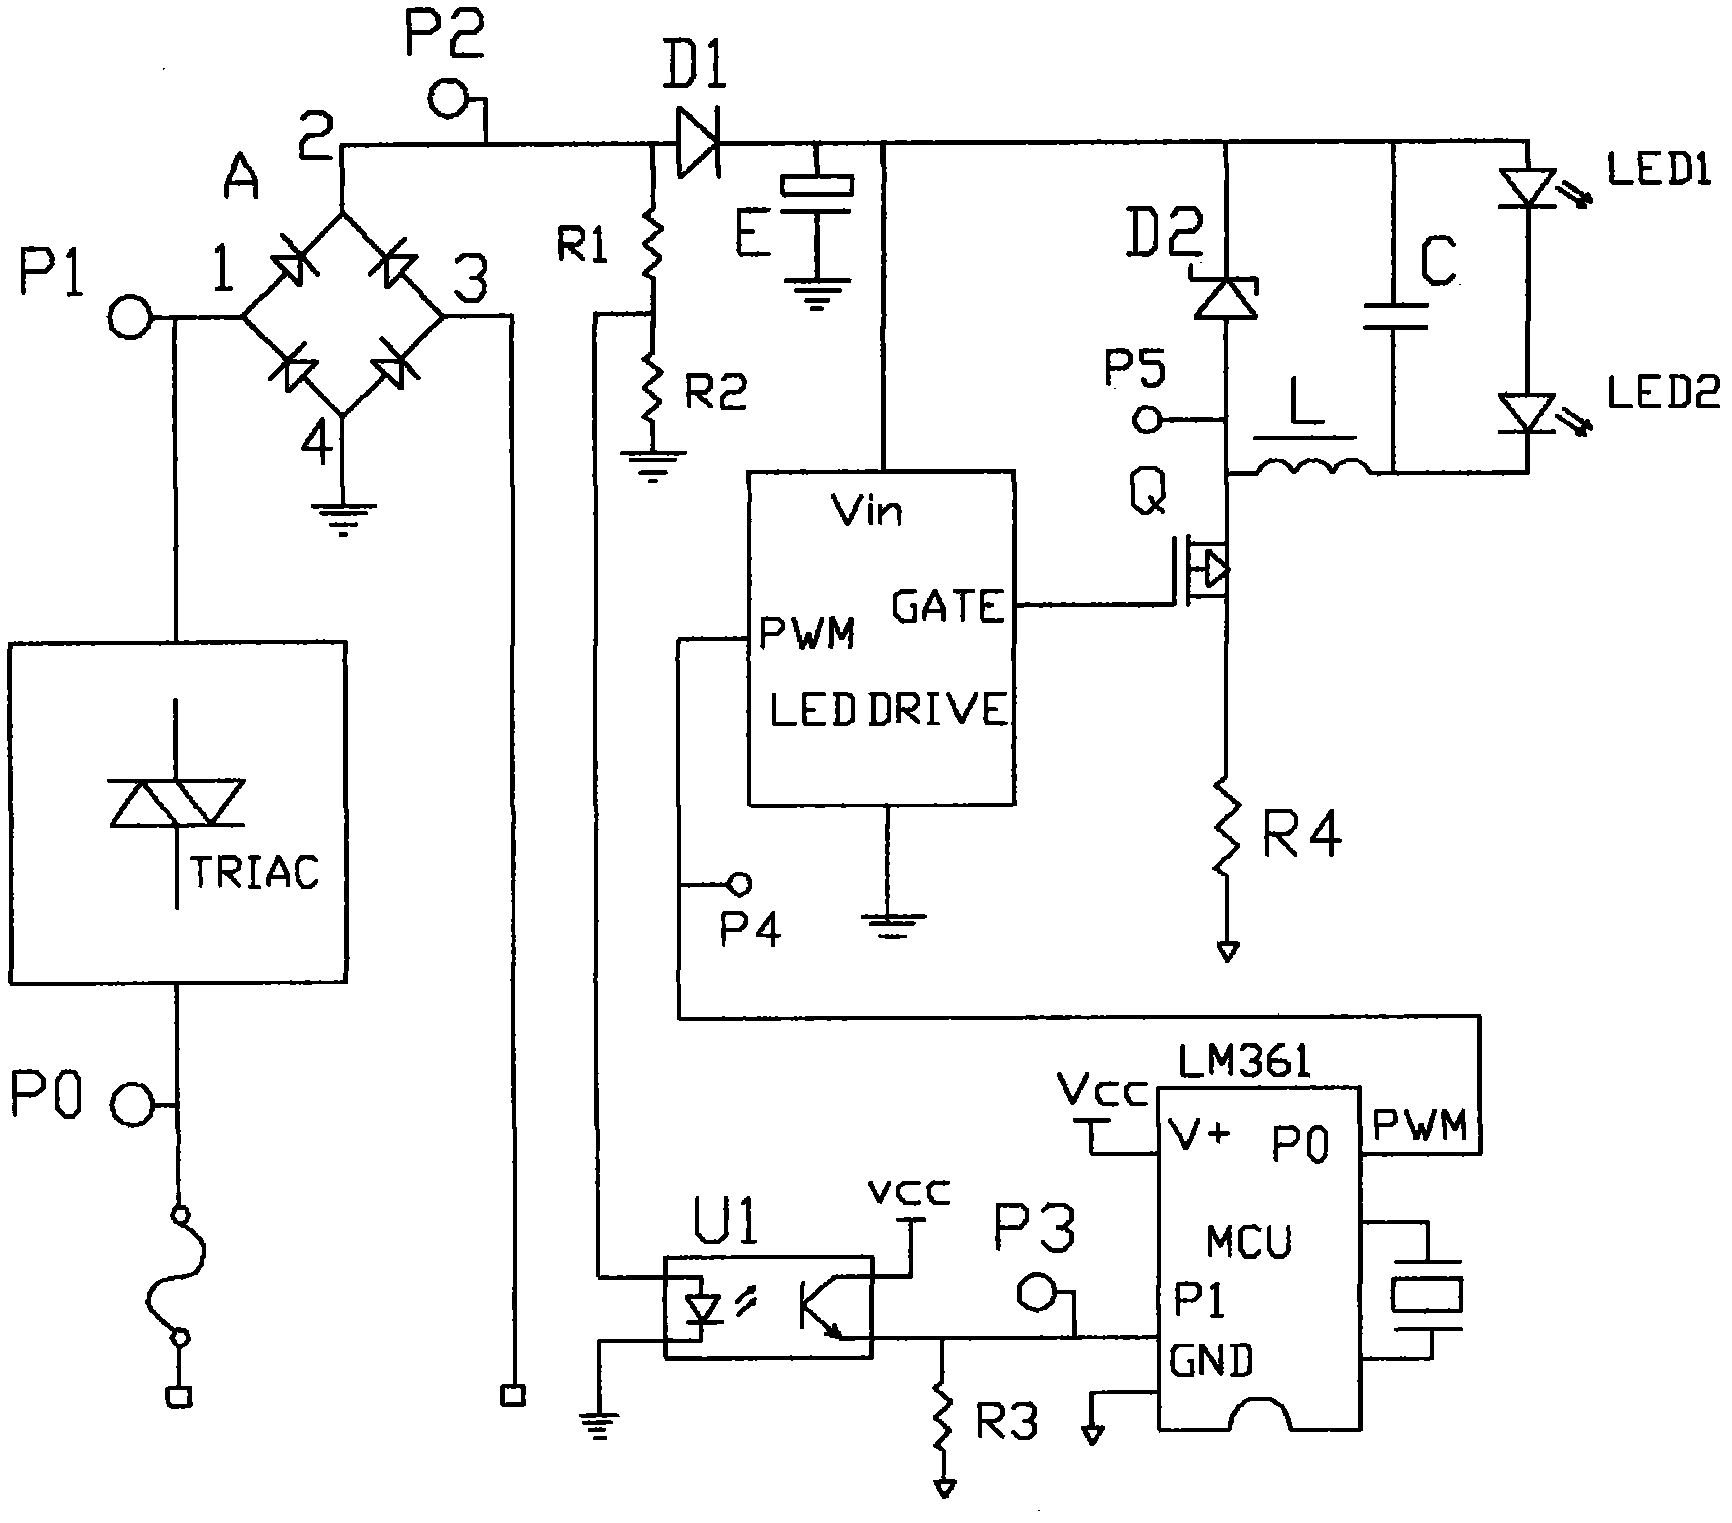 A led dimming circuit suitable for thyristor dimmer